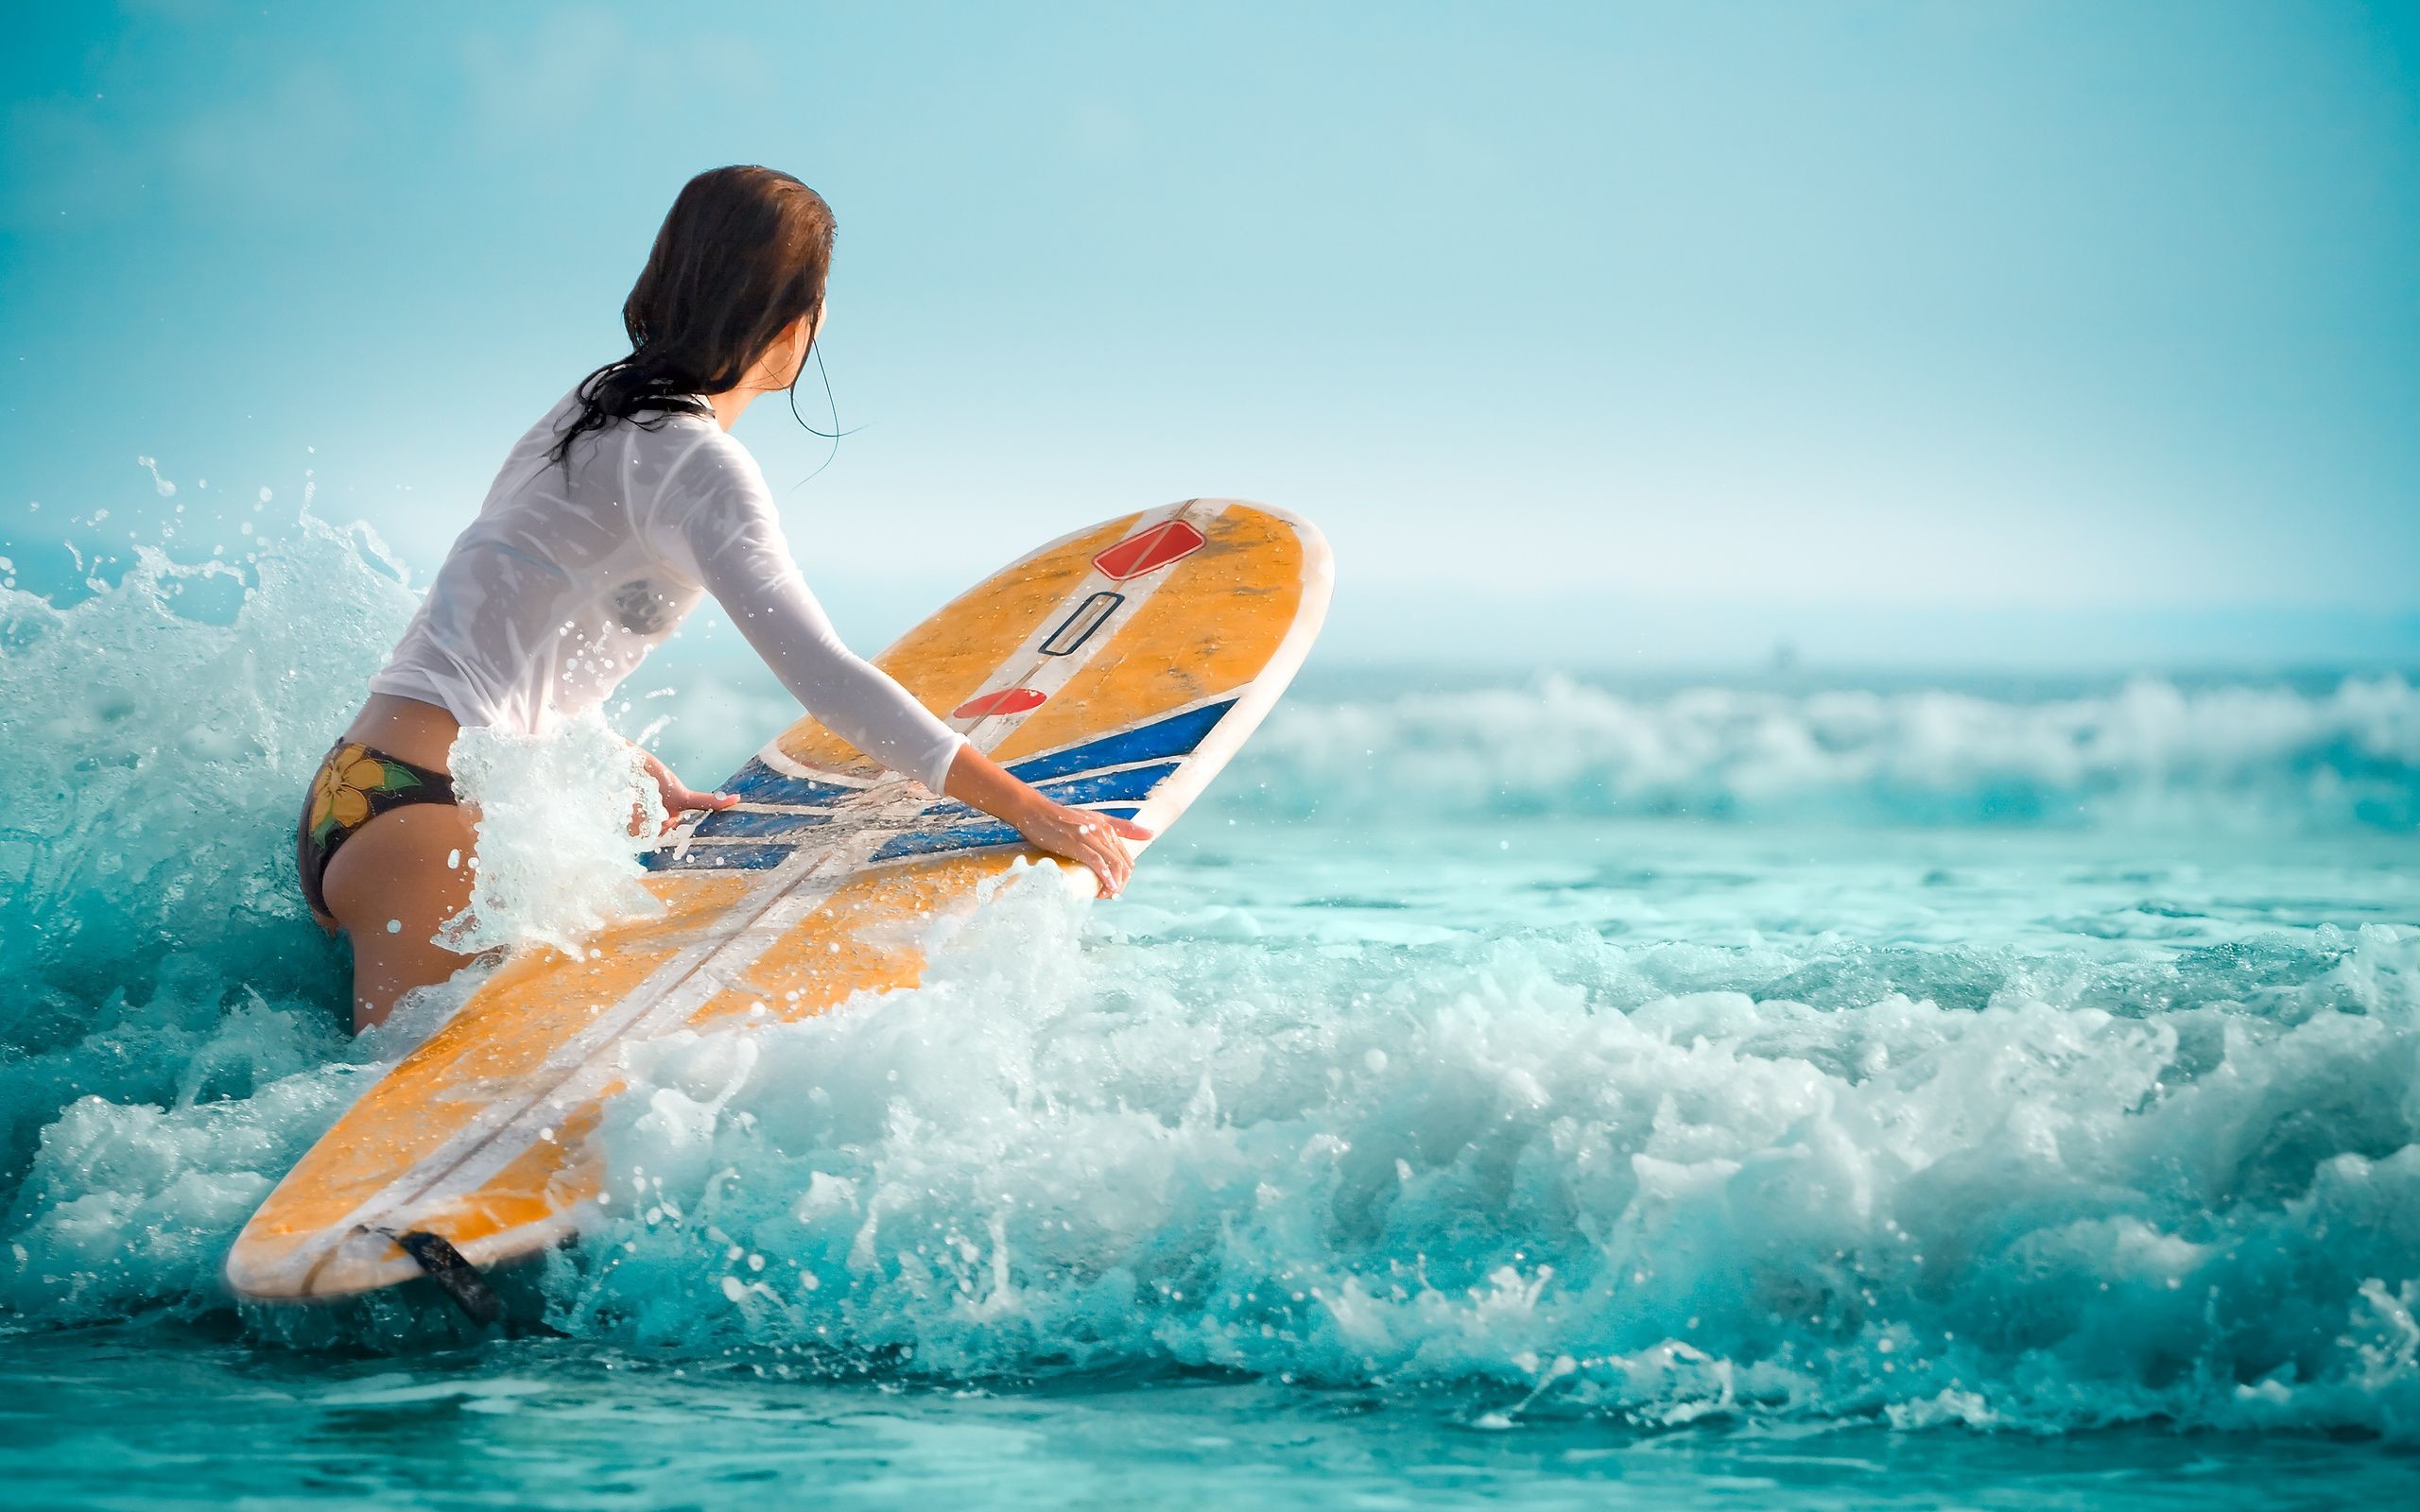 2560x1600 Surfing Girl HD Wallpaper Find best latest Surfing Girl HD Wallpaper for  your PC desktop background & mobile phones.